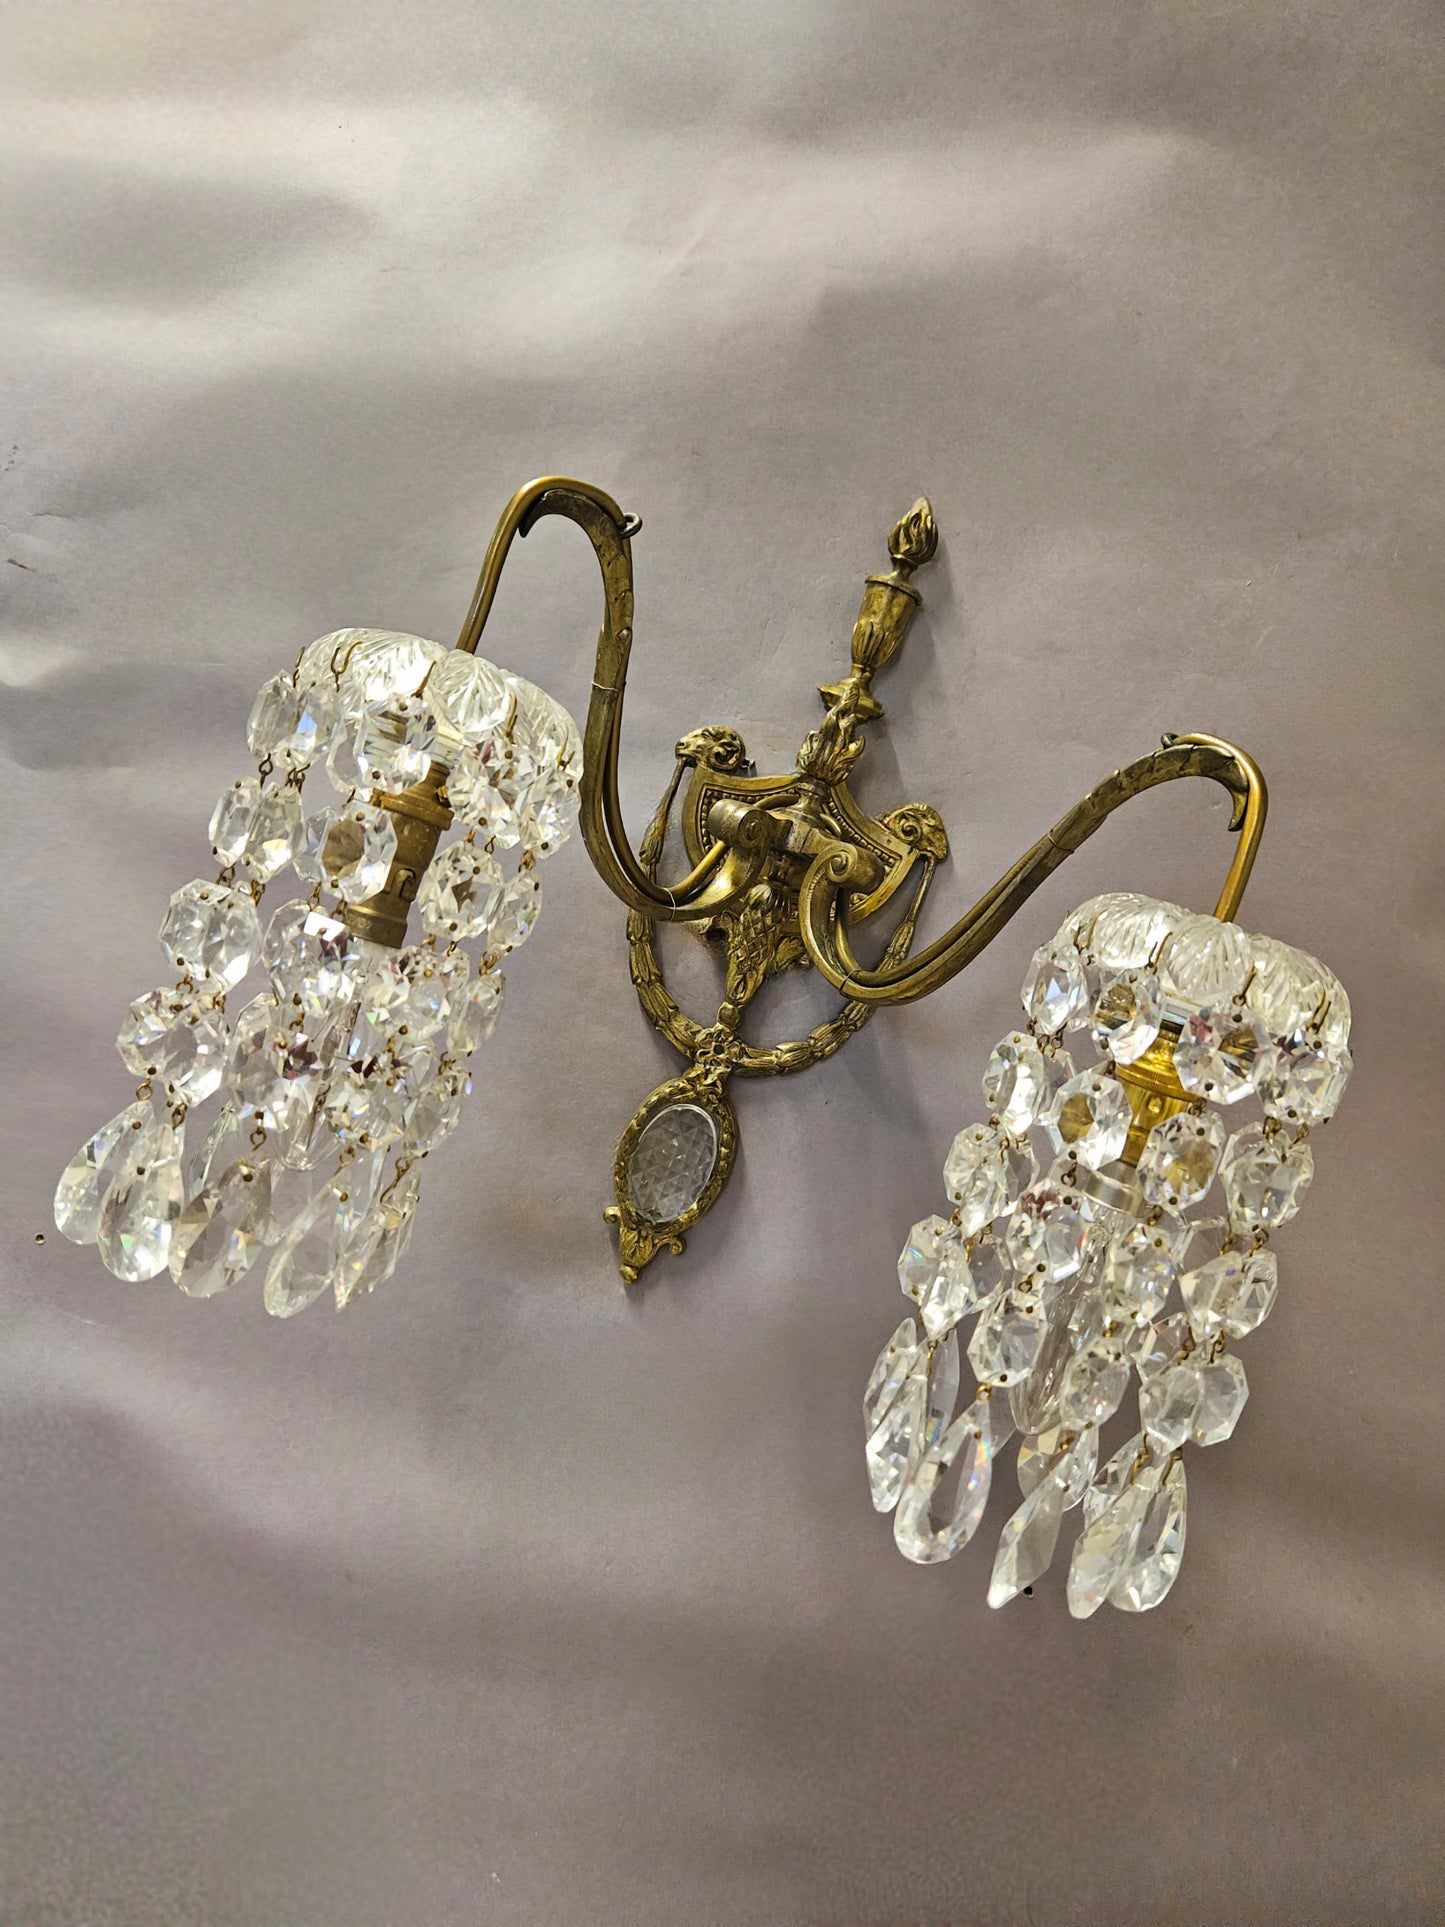 Pair Of 2-Arm Wall Lights With Cut-Glass Strings & Medallions, CA. 1910